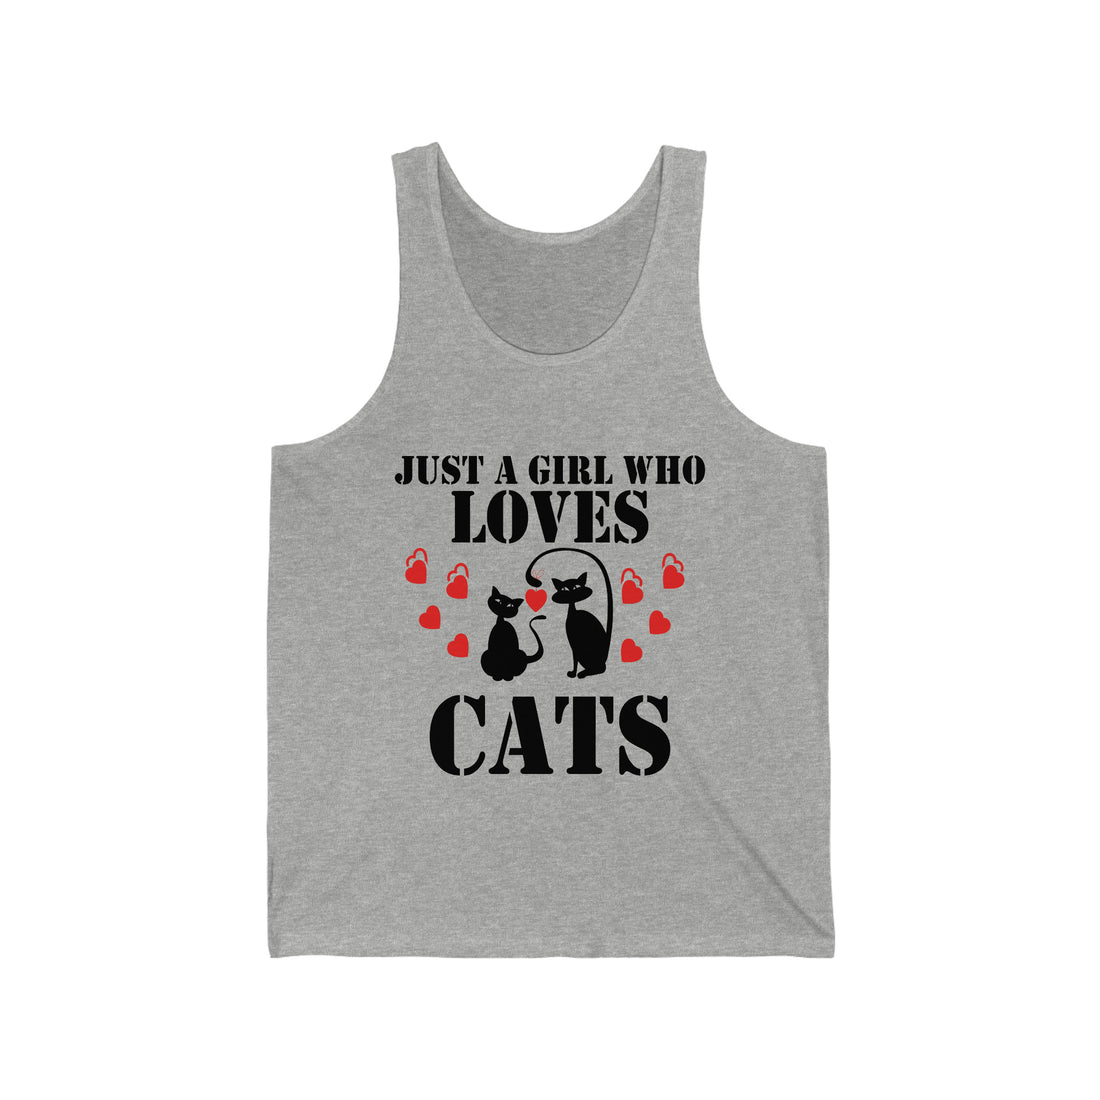 Just a Girl Who Loves Cats - Unisex Jersey Tank Top